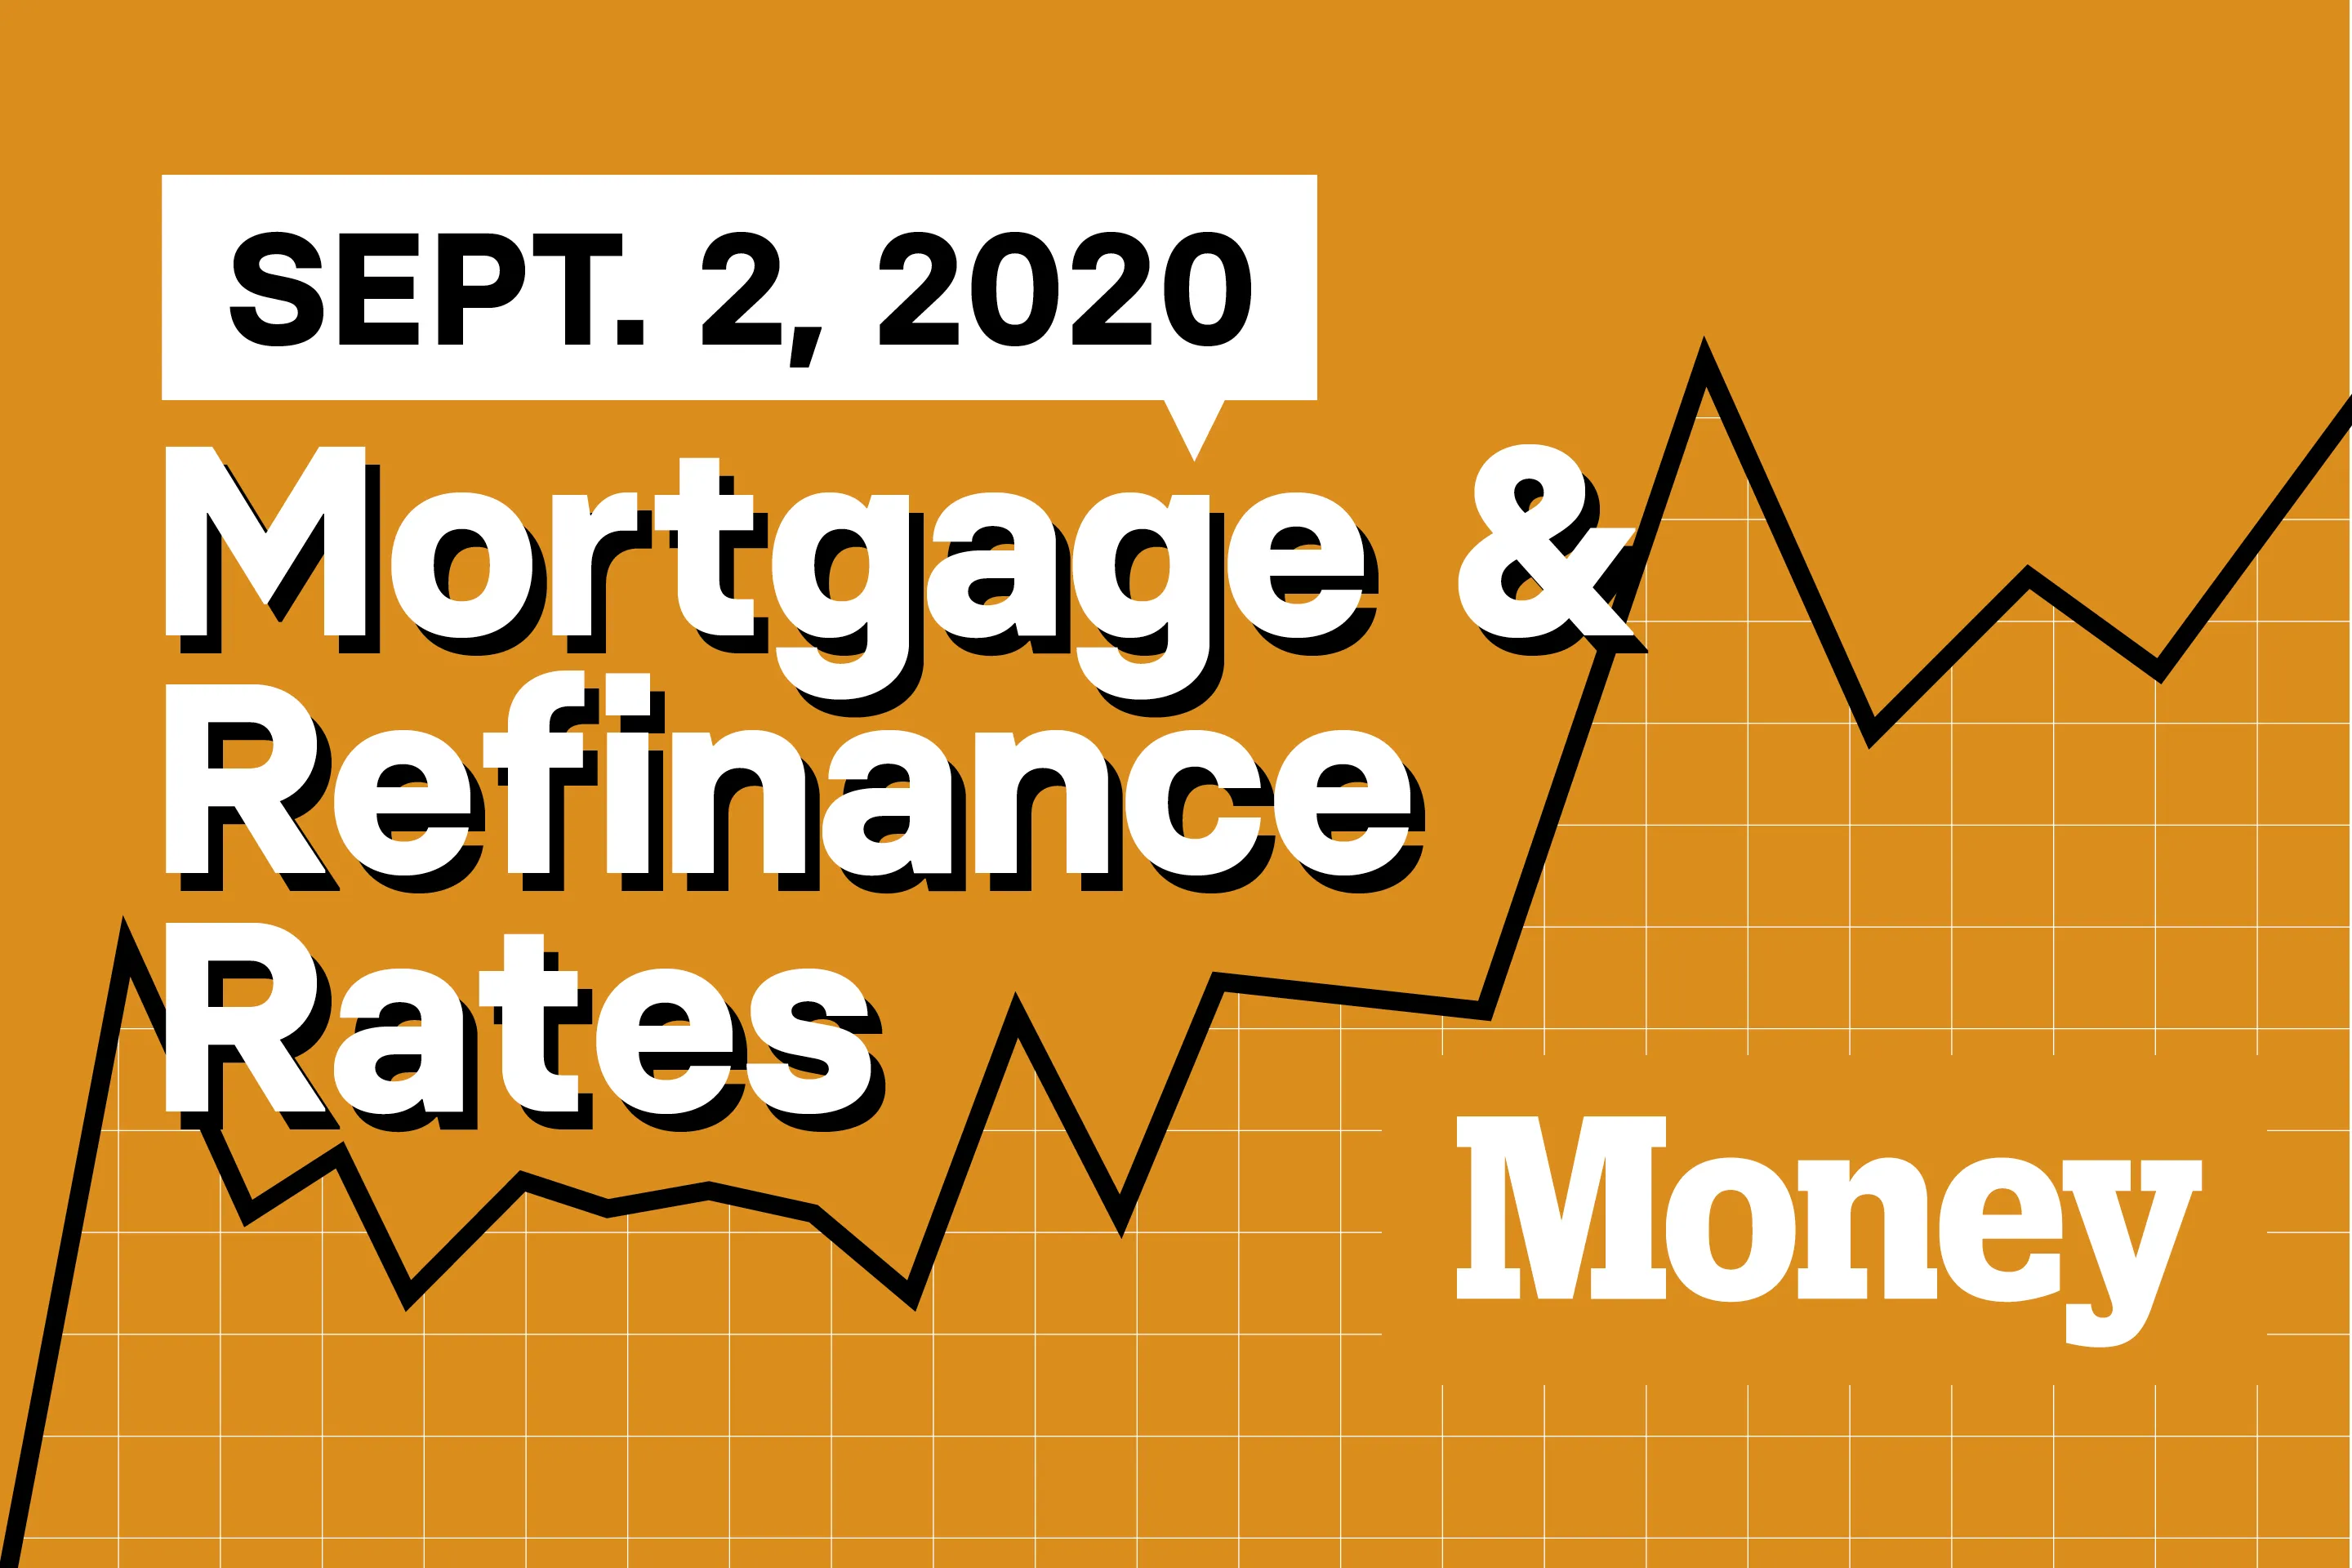 Here Are Today's Best Mortgage & Refinance Rates for September 2, 2020